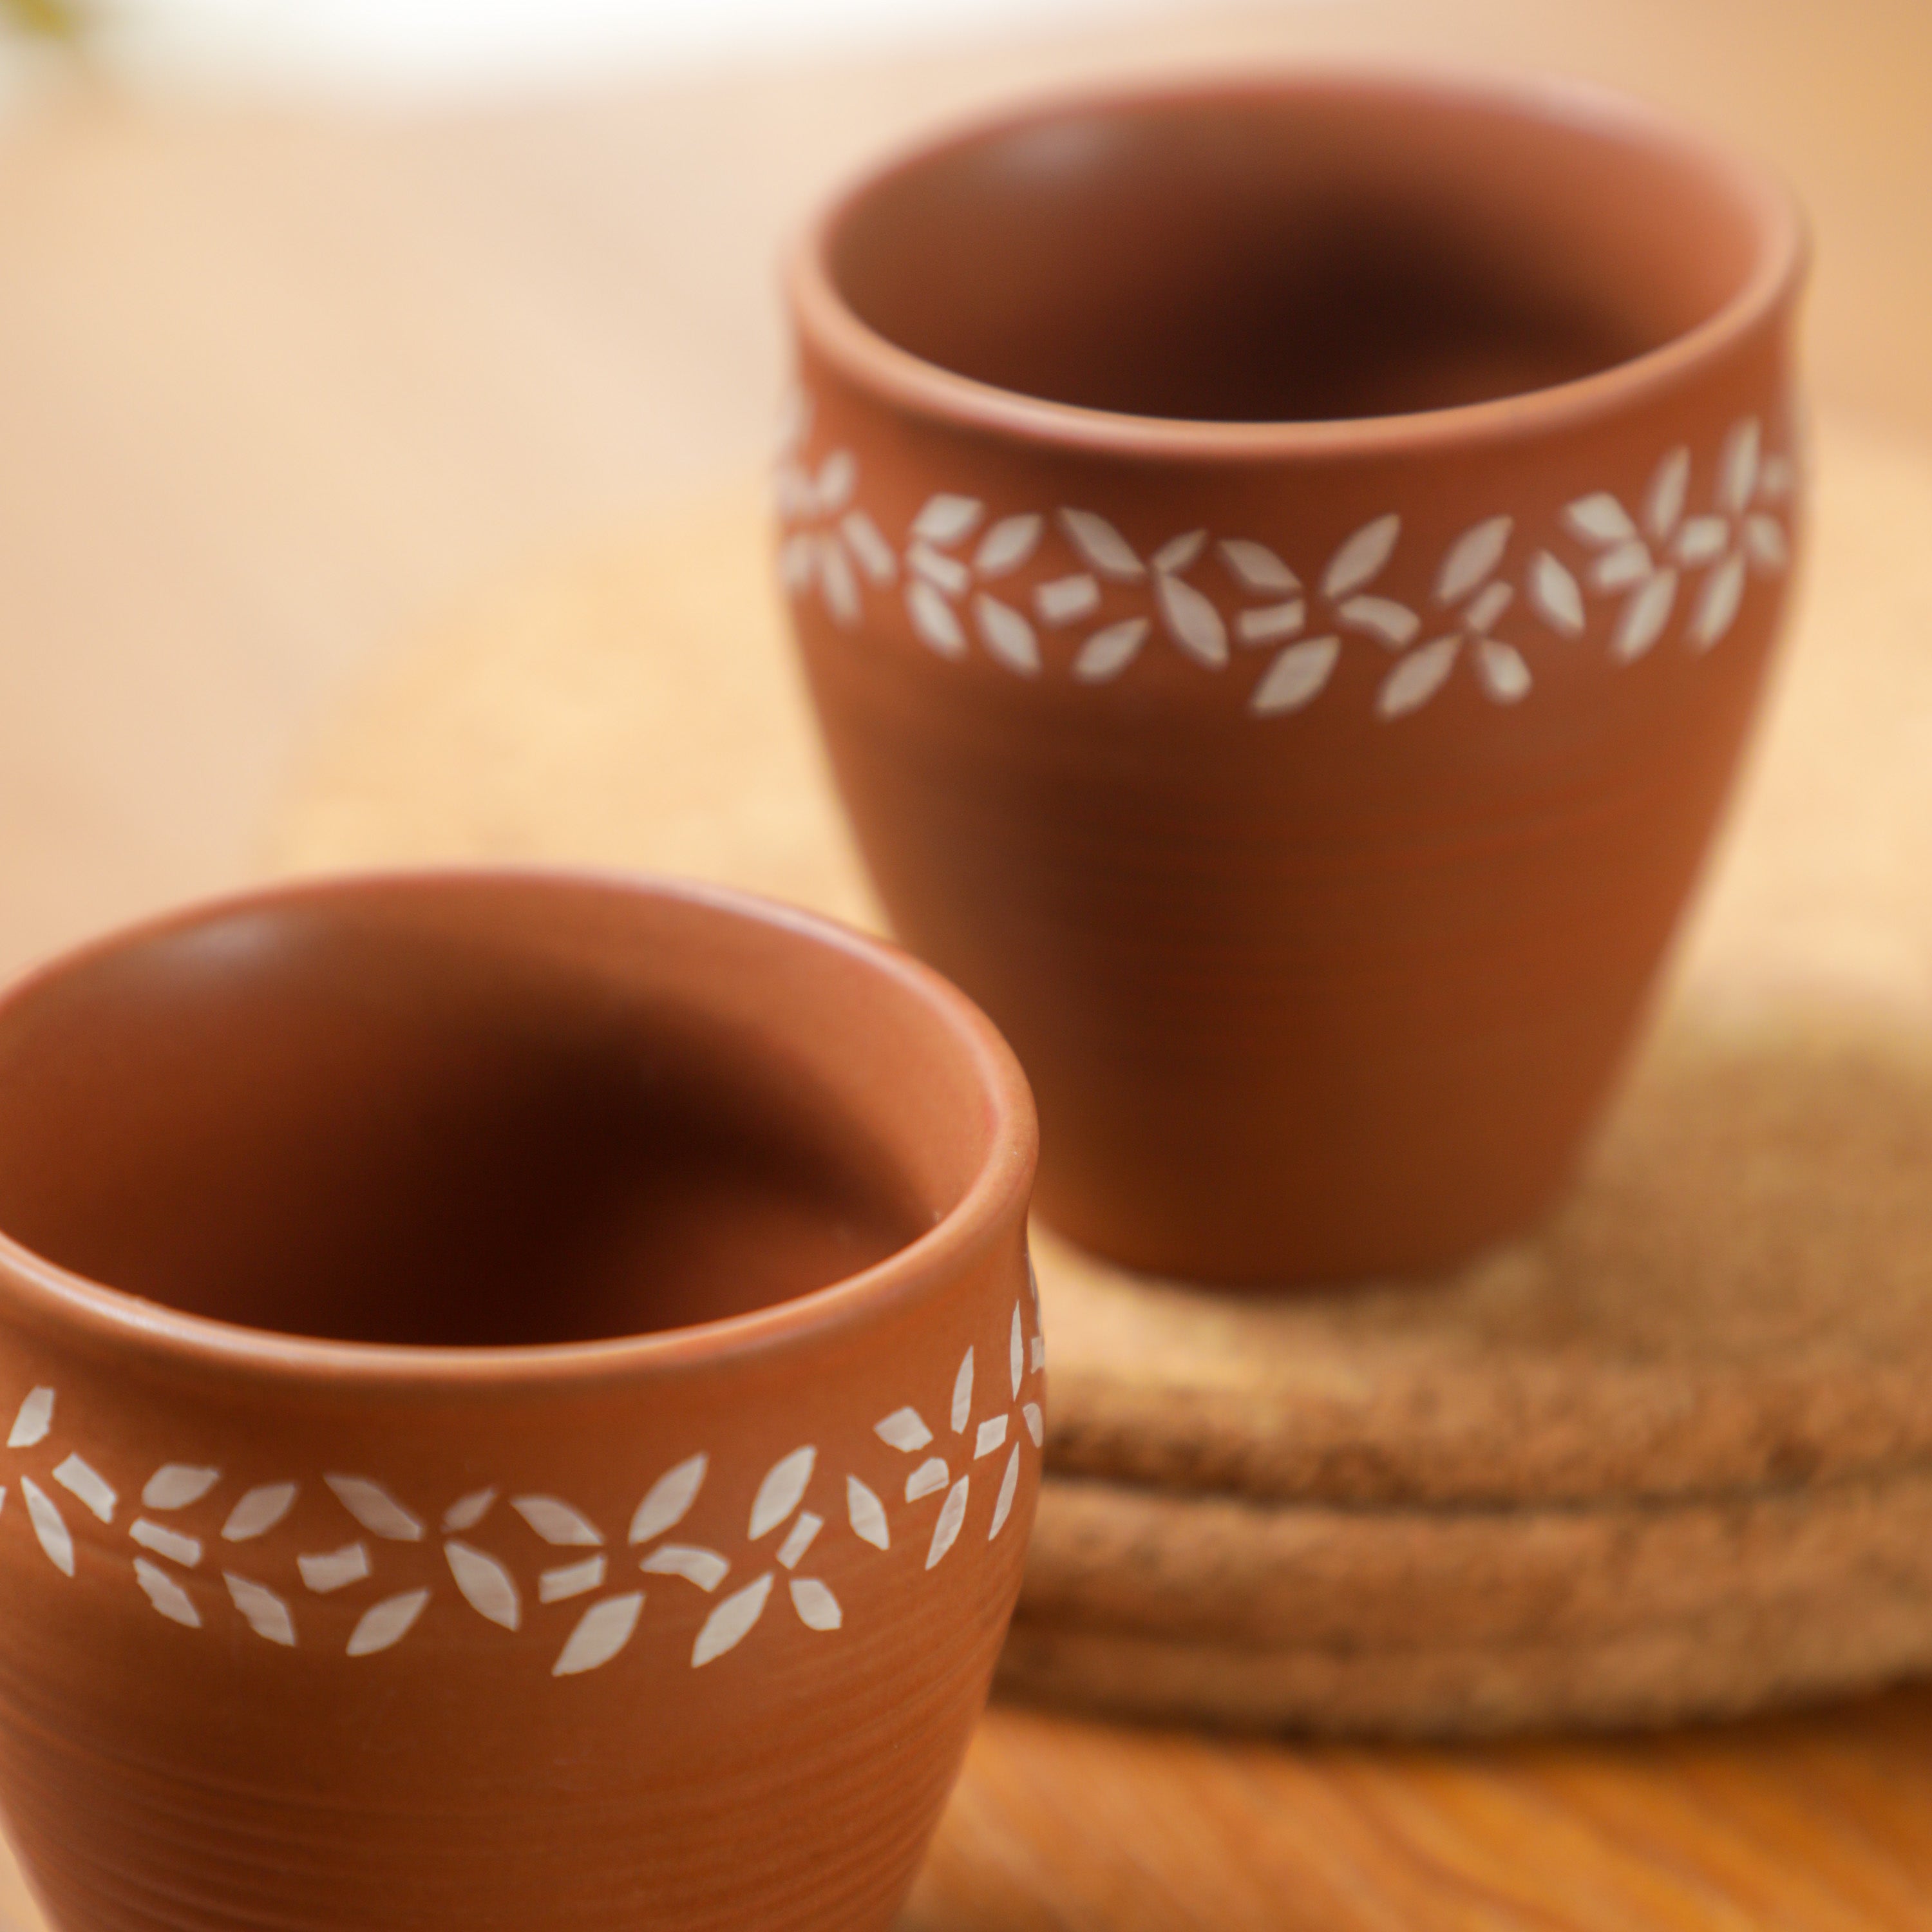 These beautifully designed cups are perfect for enjoying tea or coffee